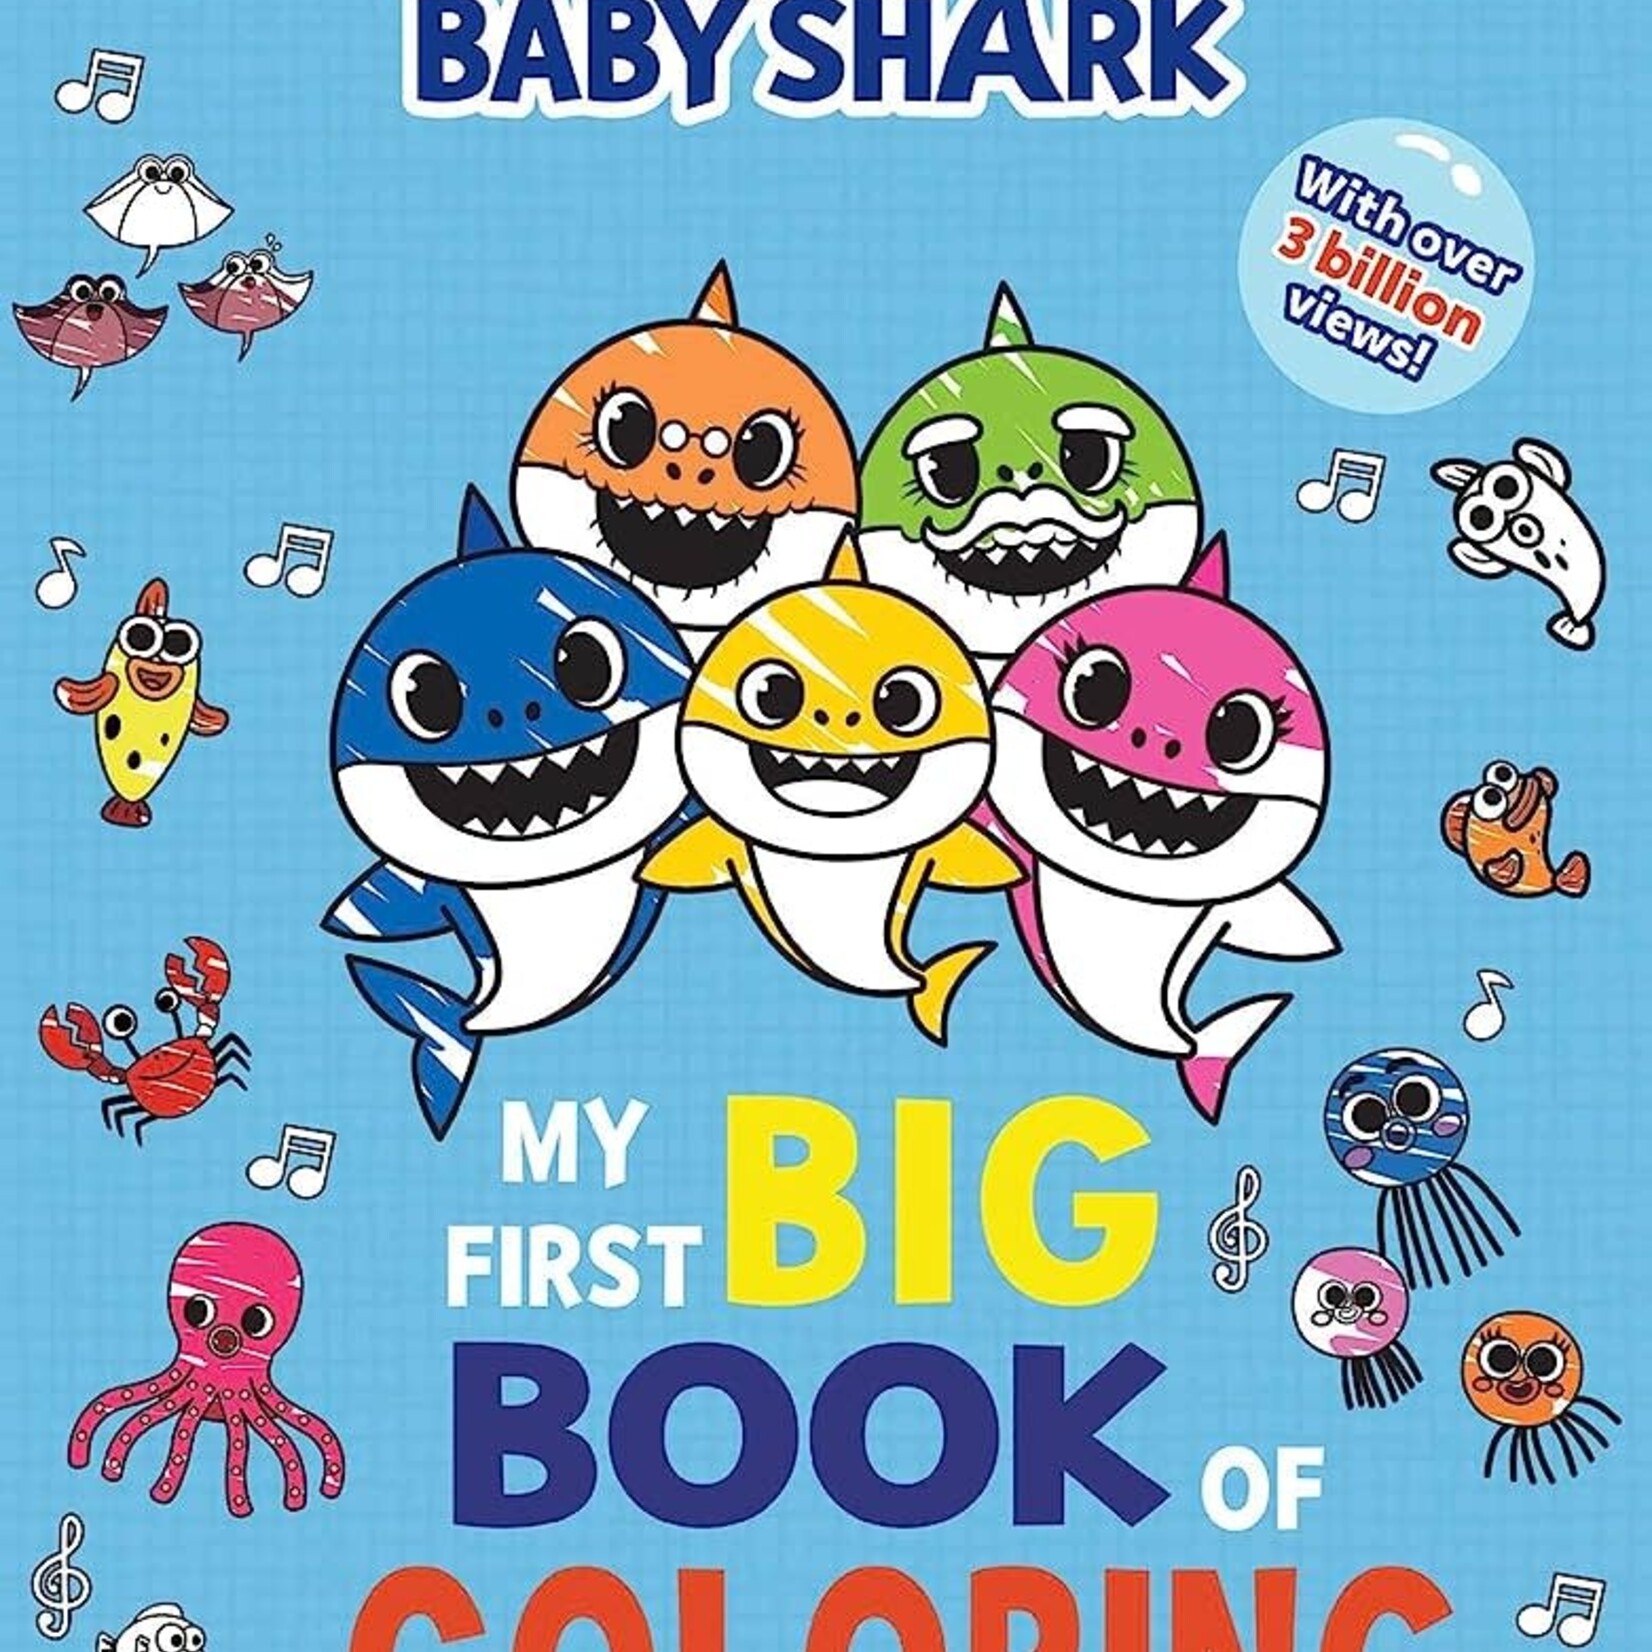 Simon and Schuster My First Big Book of Coloring: Baby Shark